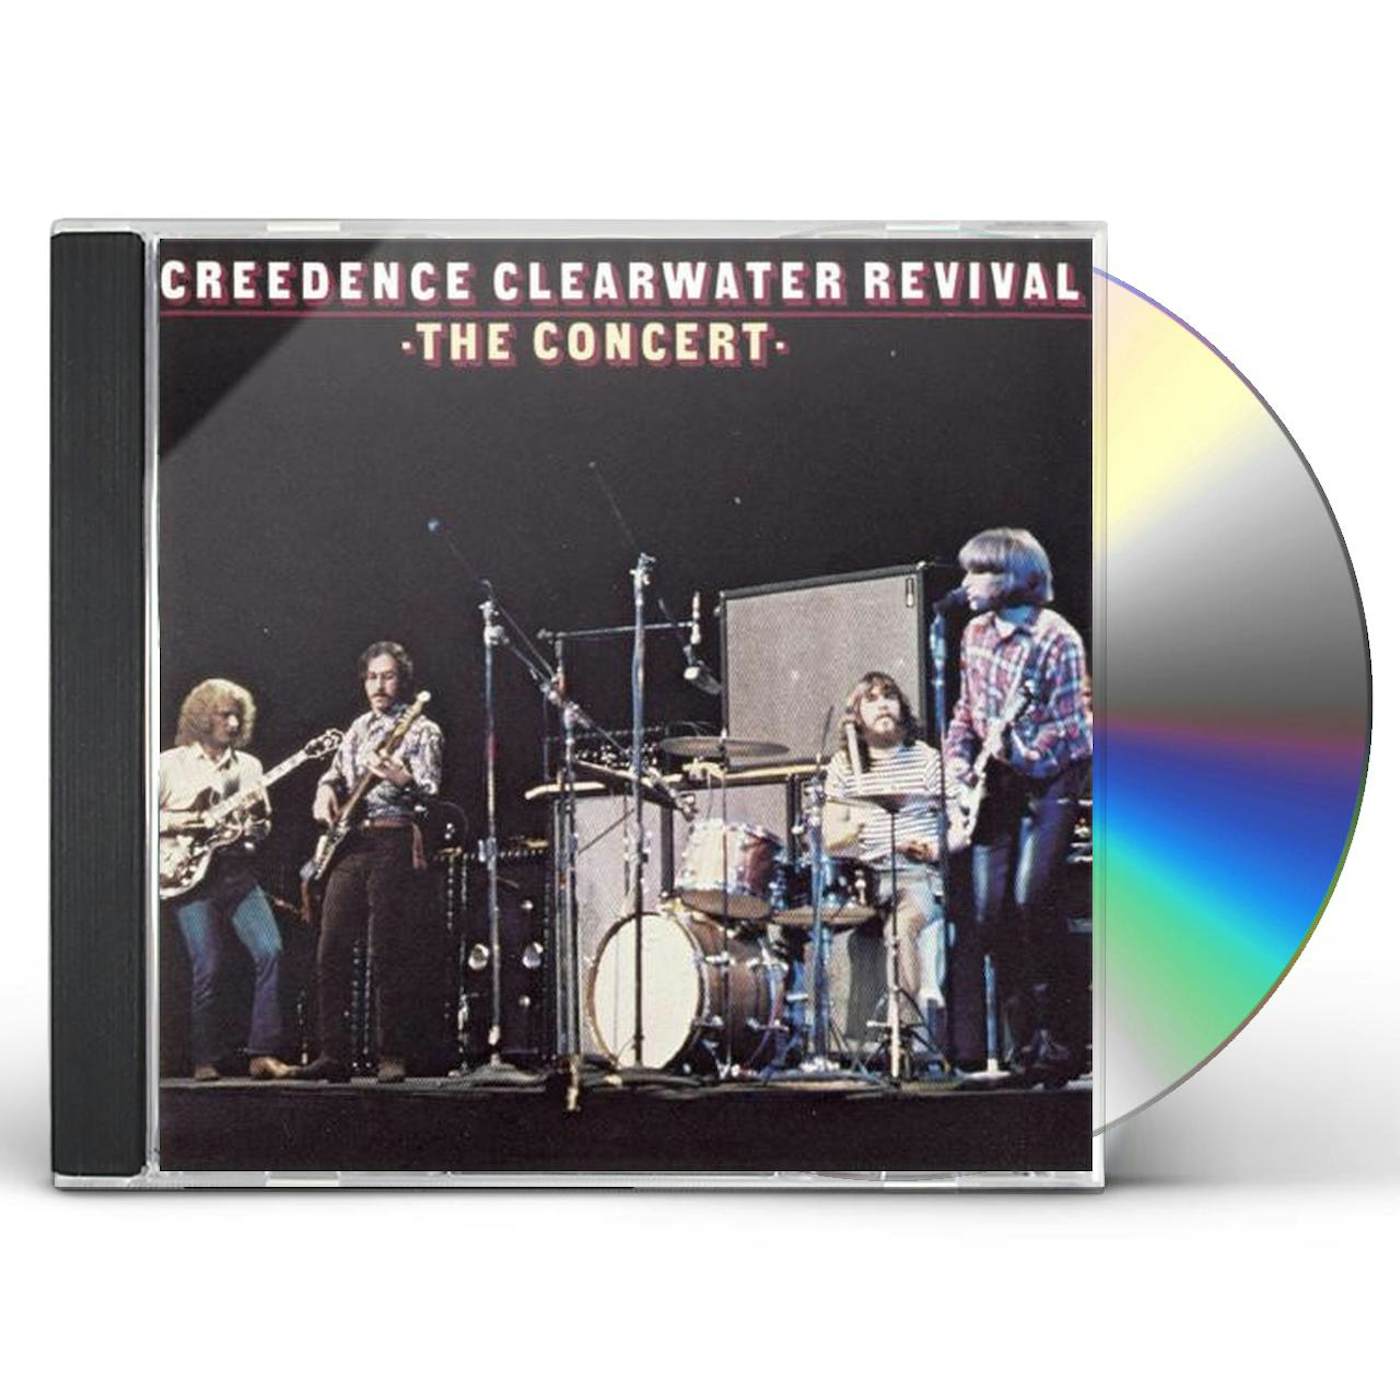 Creedence Clearwater Revival CONCERT CD